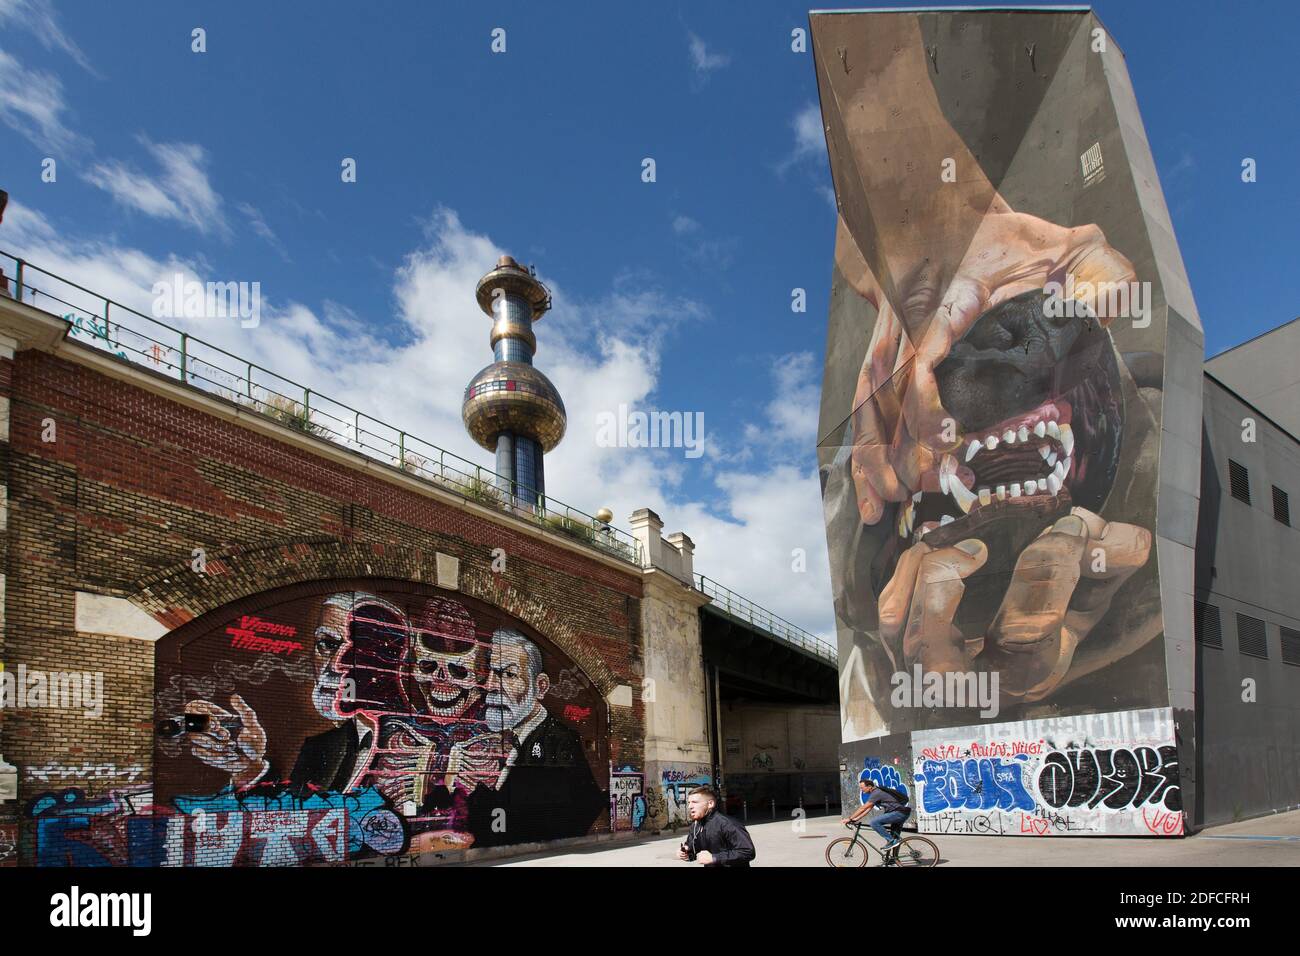 IN THE BACKGROUND THE THERMAL PLANT OF SPITTELAU, STREET ART, VIENNA, AUSTRIA Stock Photo